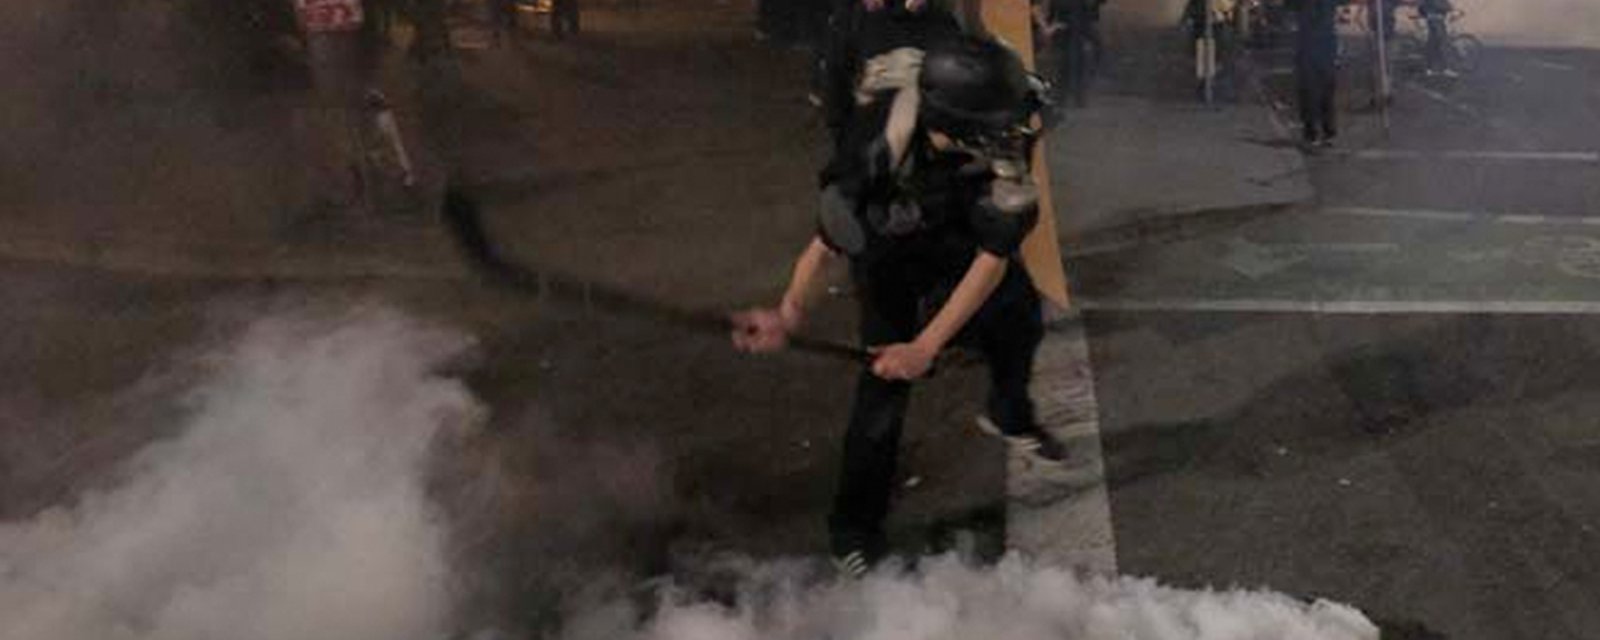 Protester uses hockey stick to slapshot tear gas canister at Portland police